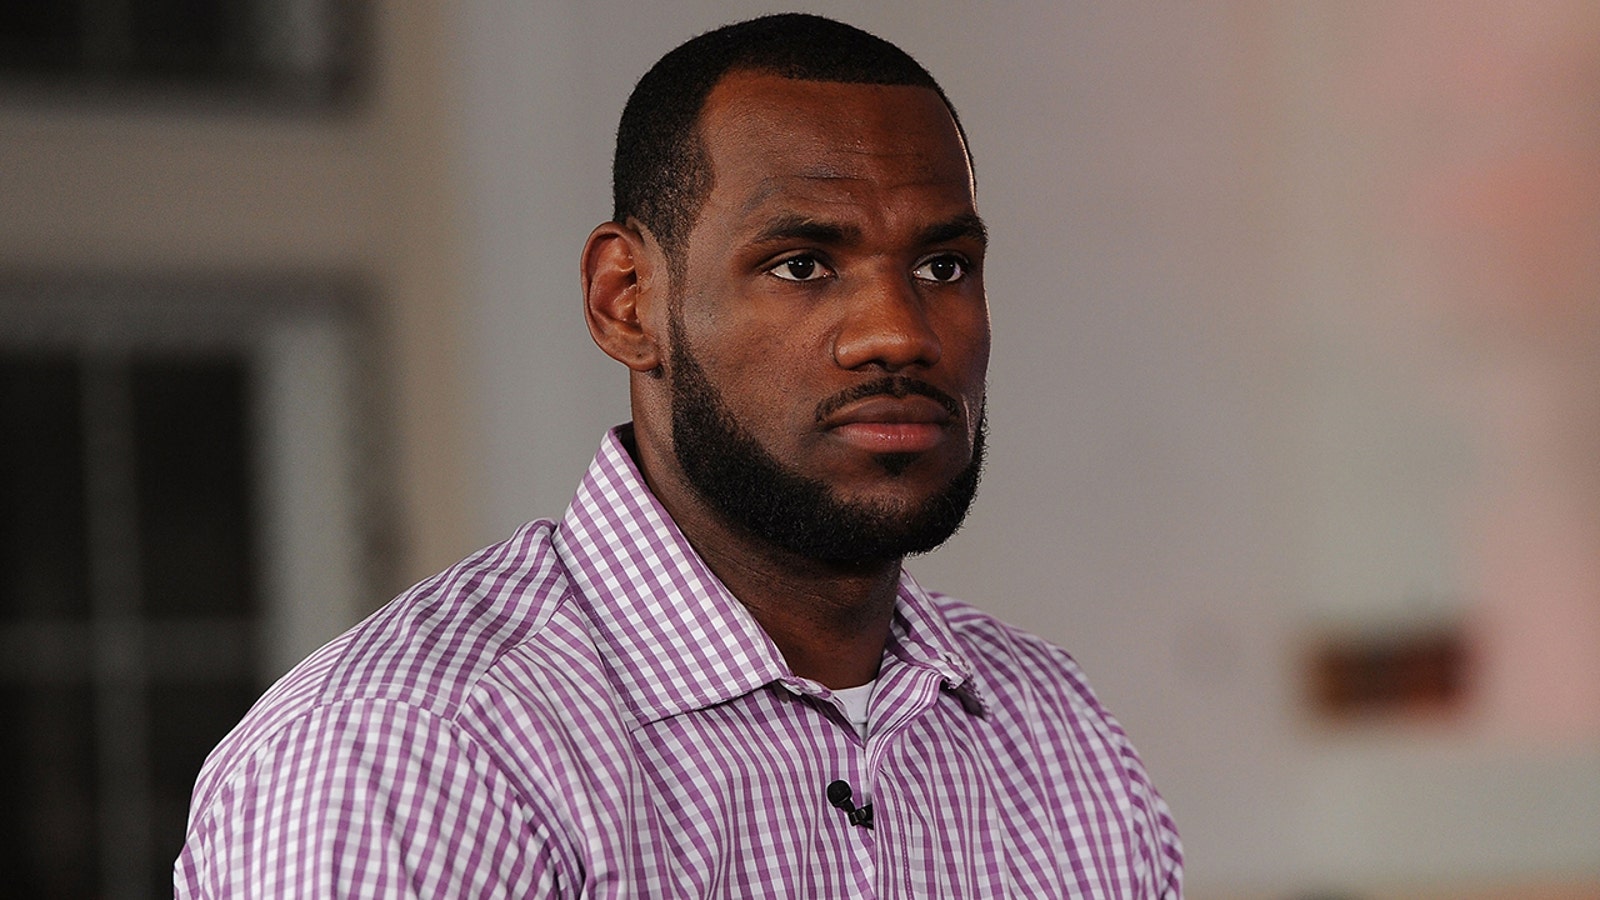 LeBron James' 'The Decision' remains one of the worst sports breakups in history